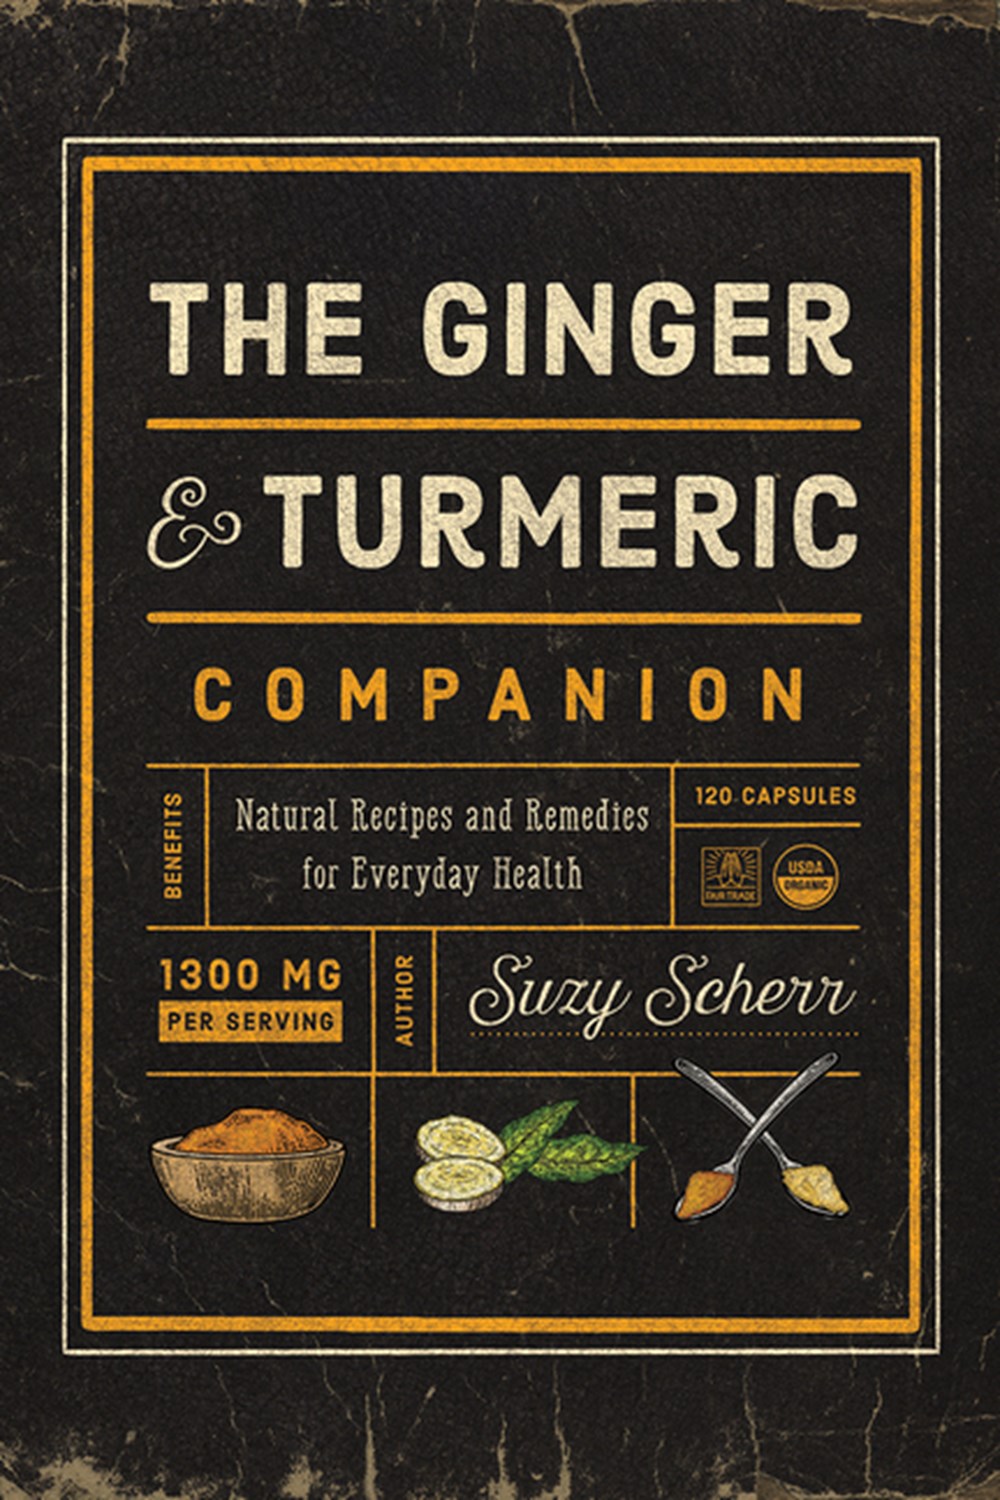 Ginger and Turmeric Companion: Natural Recipes and Remedies for Everyday Health